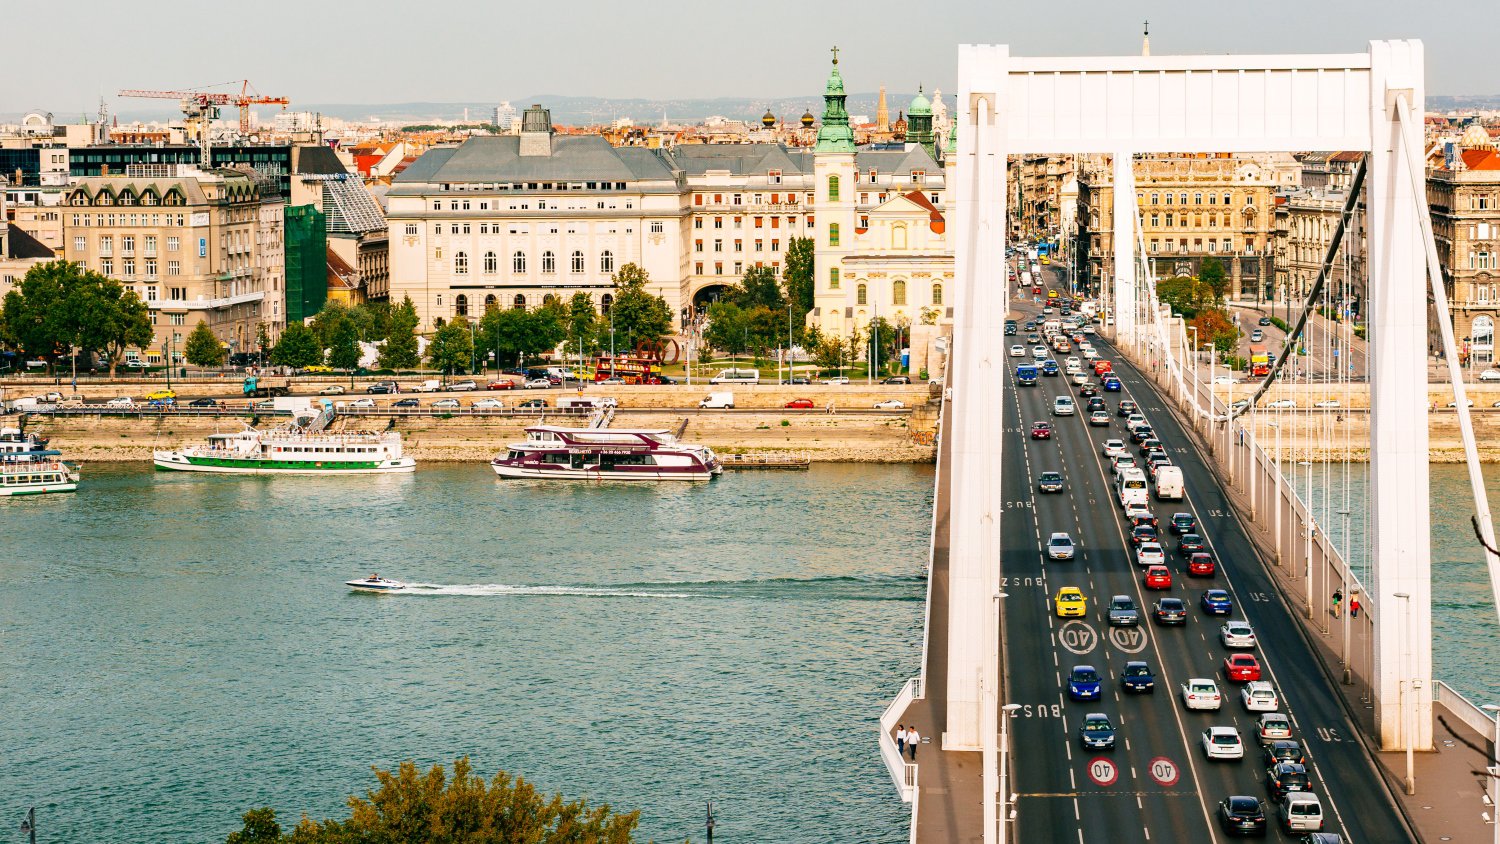 News Article Vacancy rate of the Budapest office market further decreases